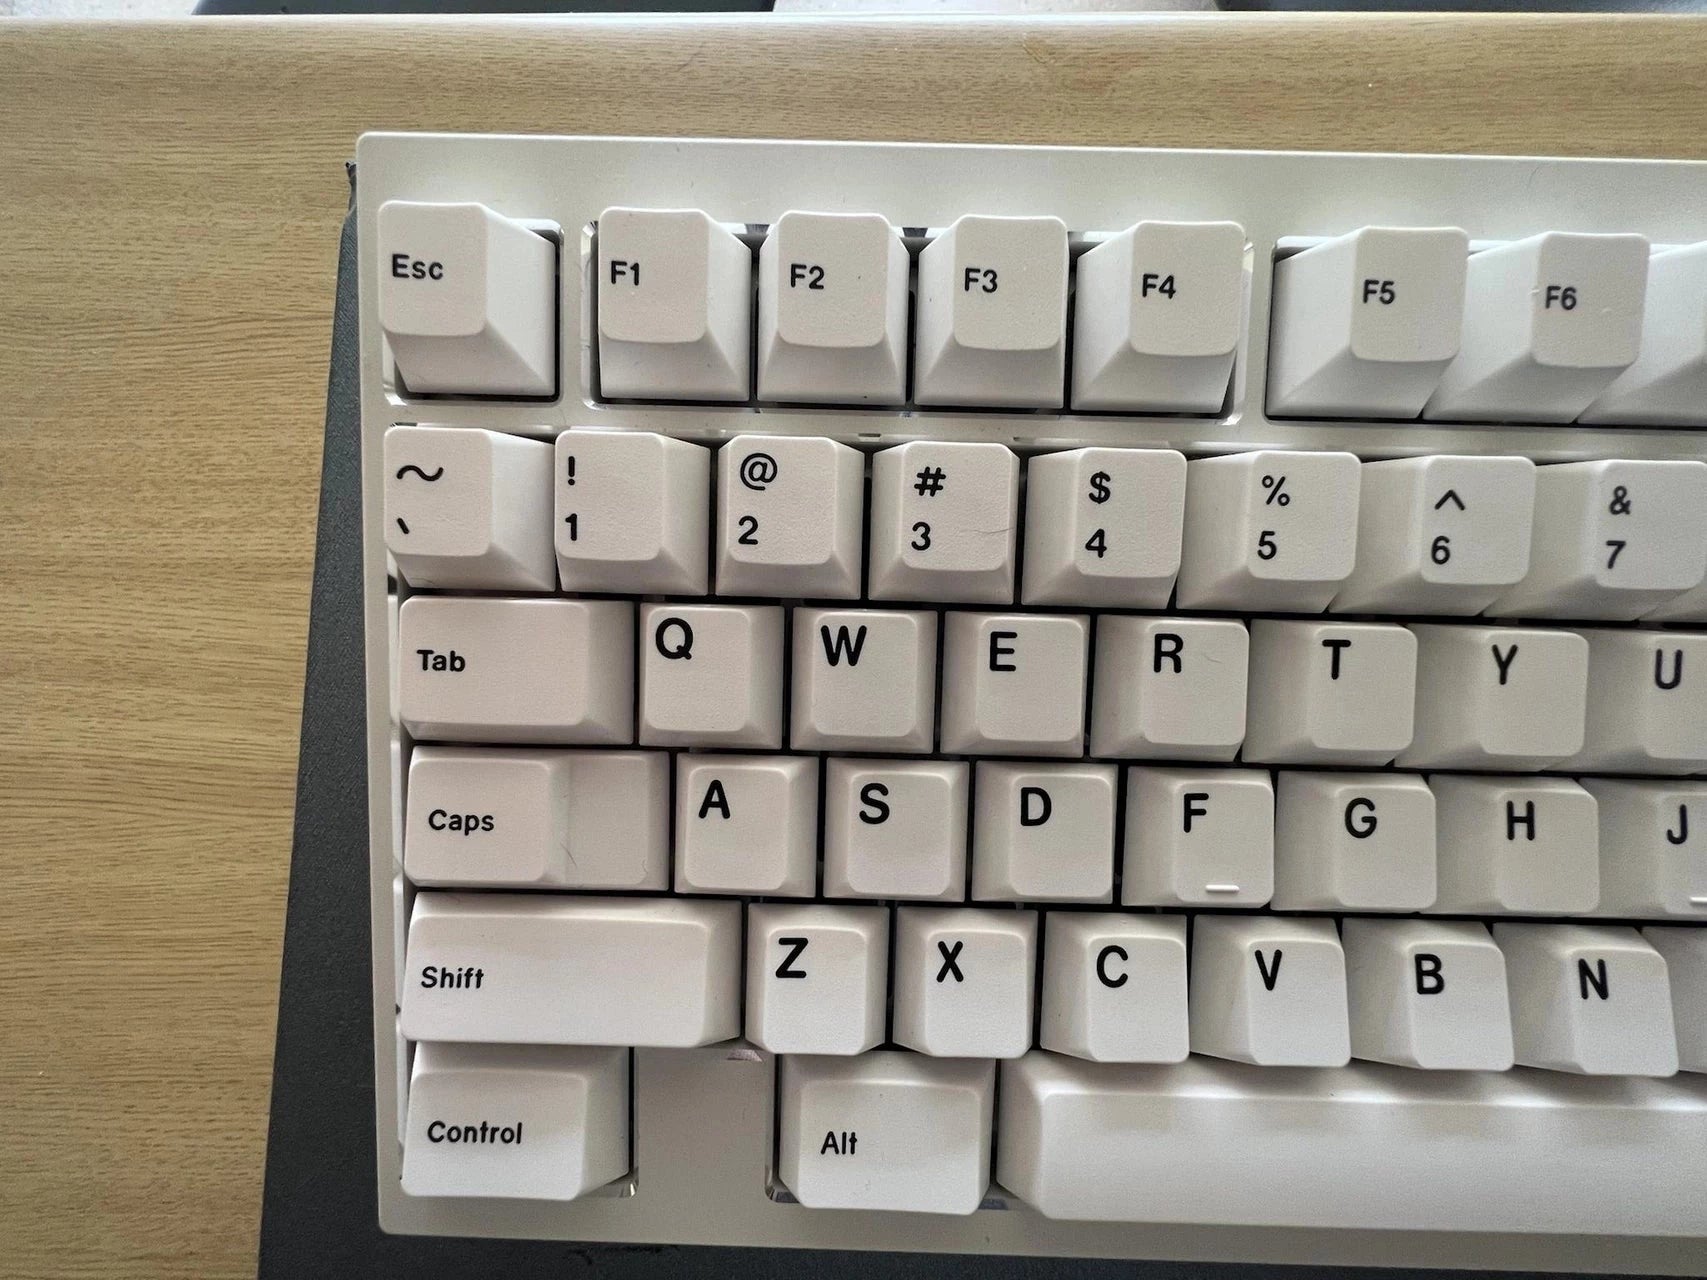 [KFA MARKETPLACE] Mr suit WKL Babypowder Silver Glossy Chamfers Built - KeebsForAll